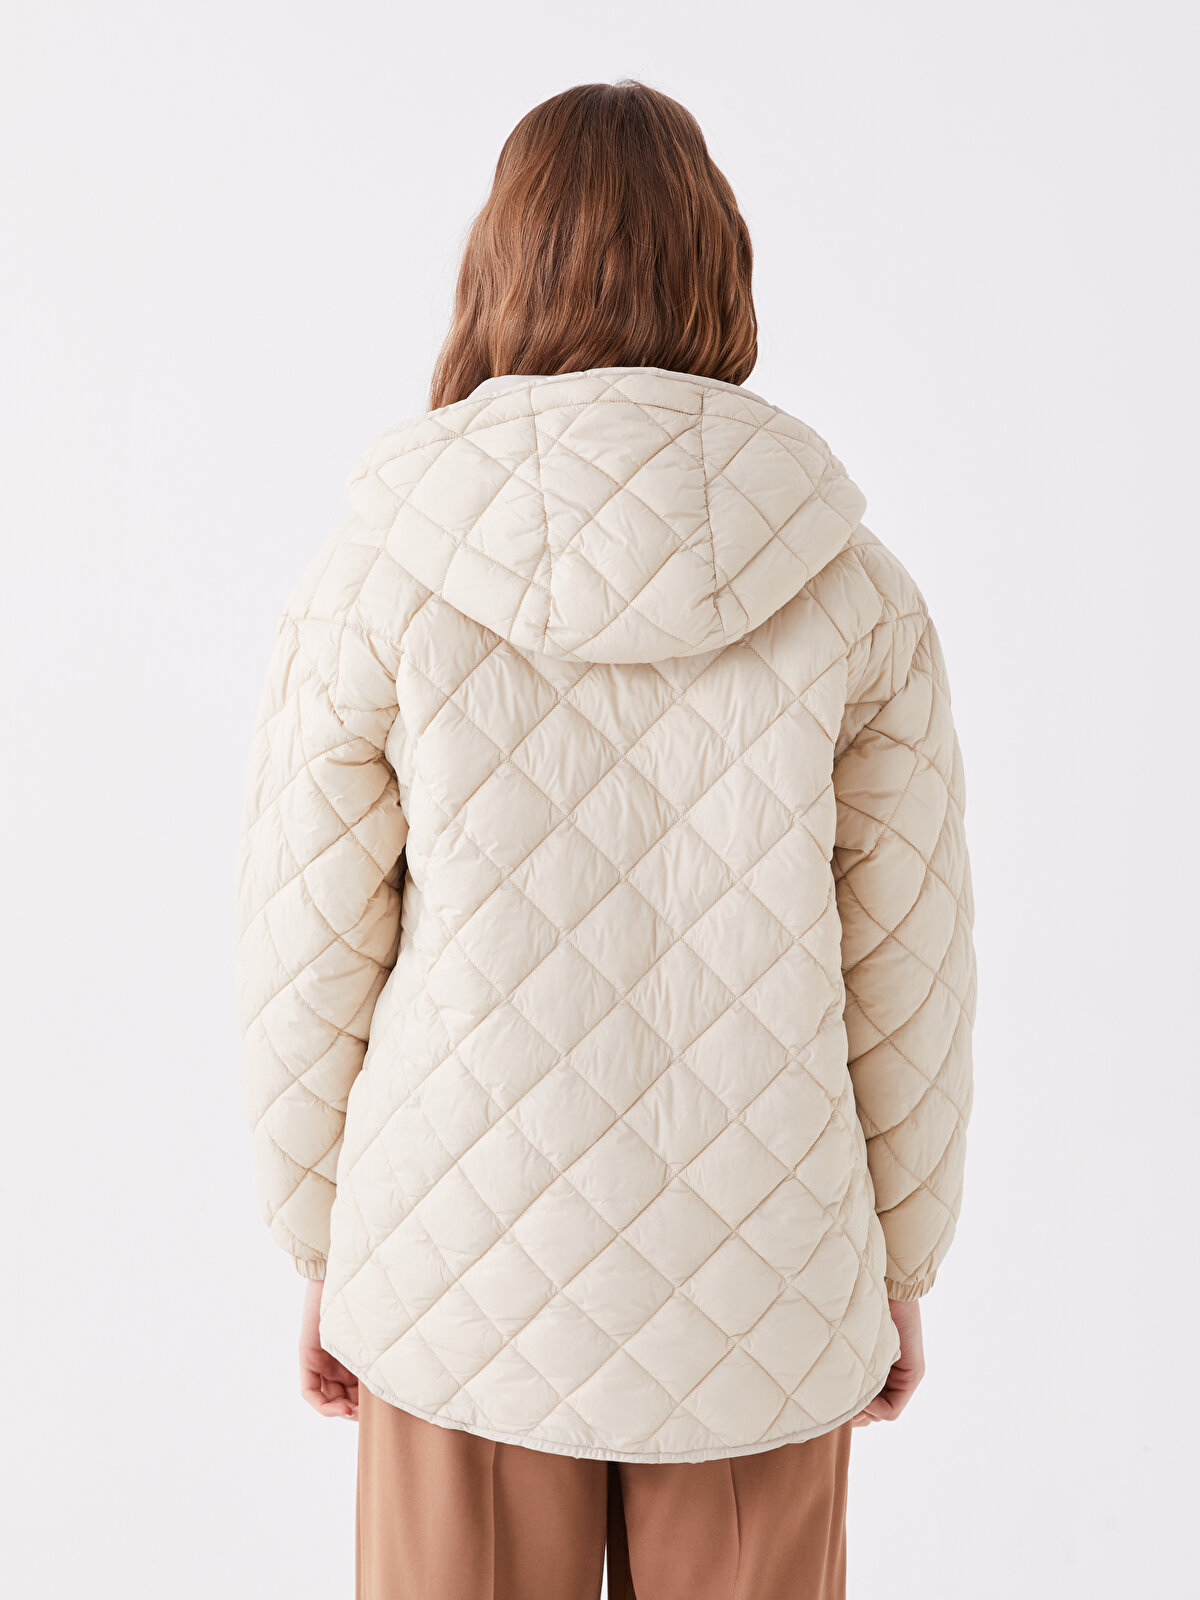 Hooded Quilted Long-Sleeve Oversized Women's Puffer Coat -S44901Z8 